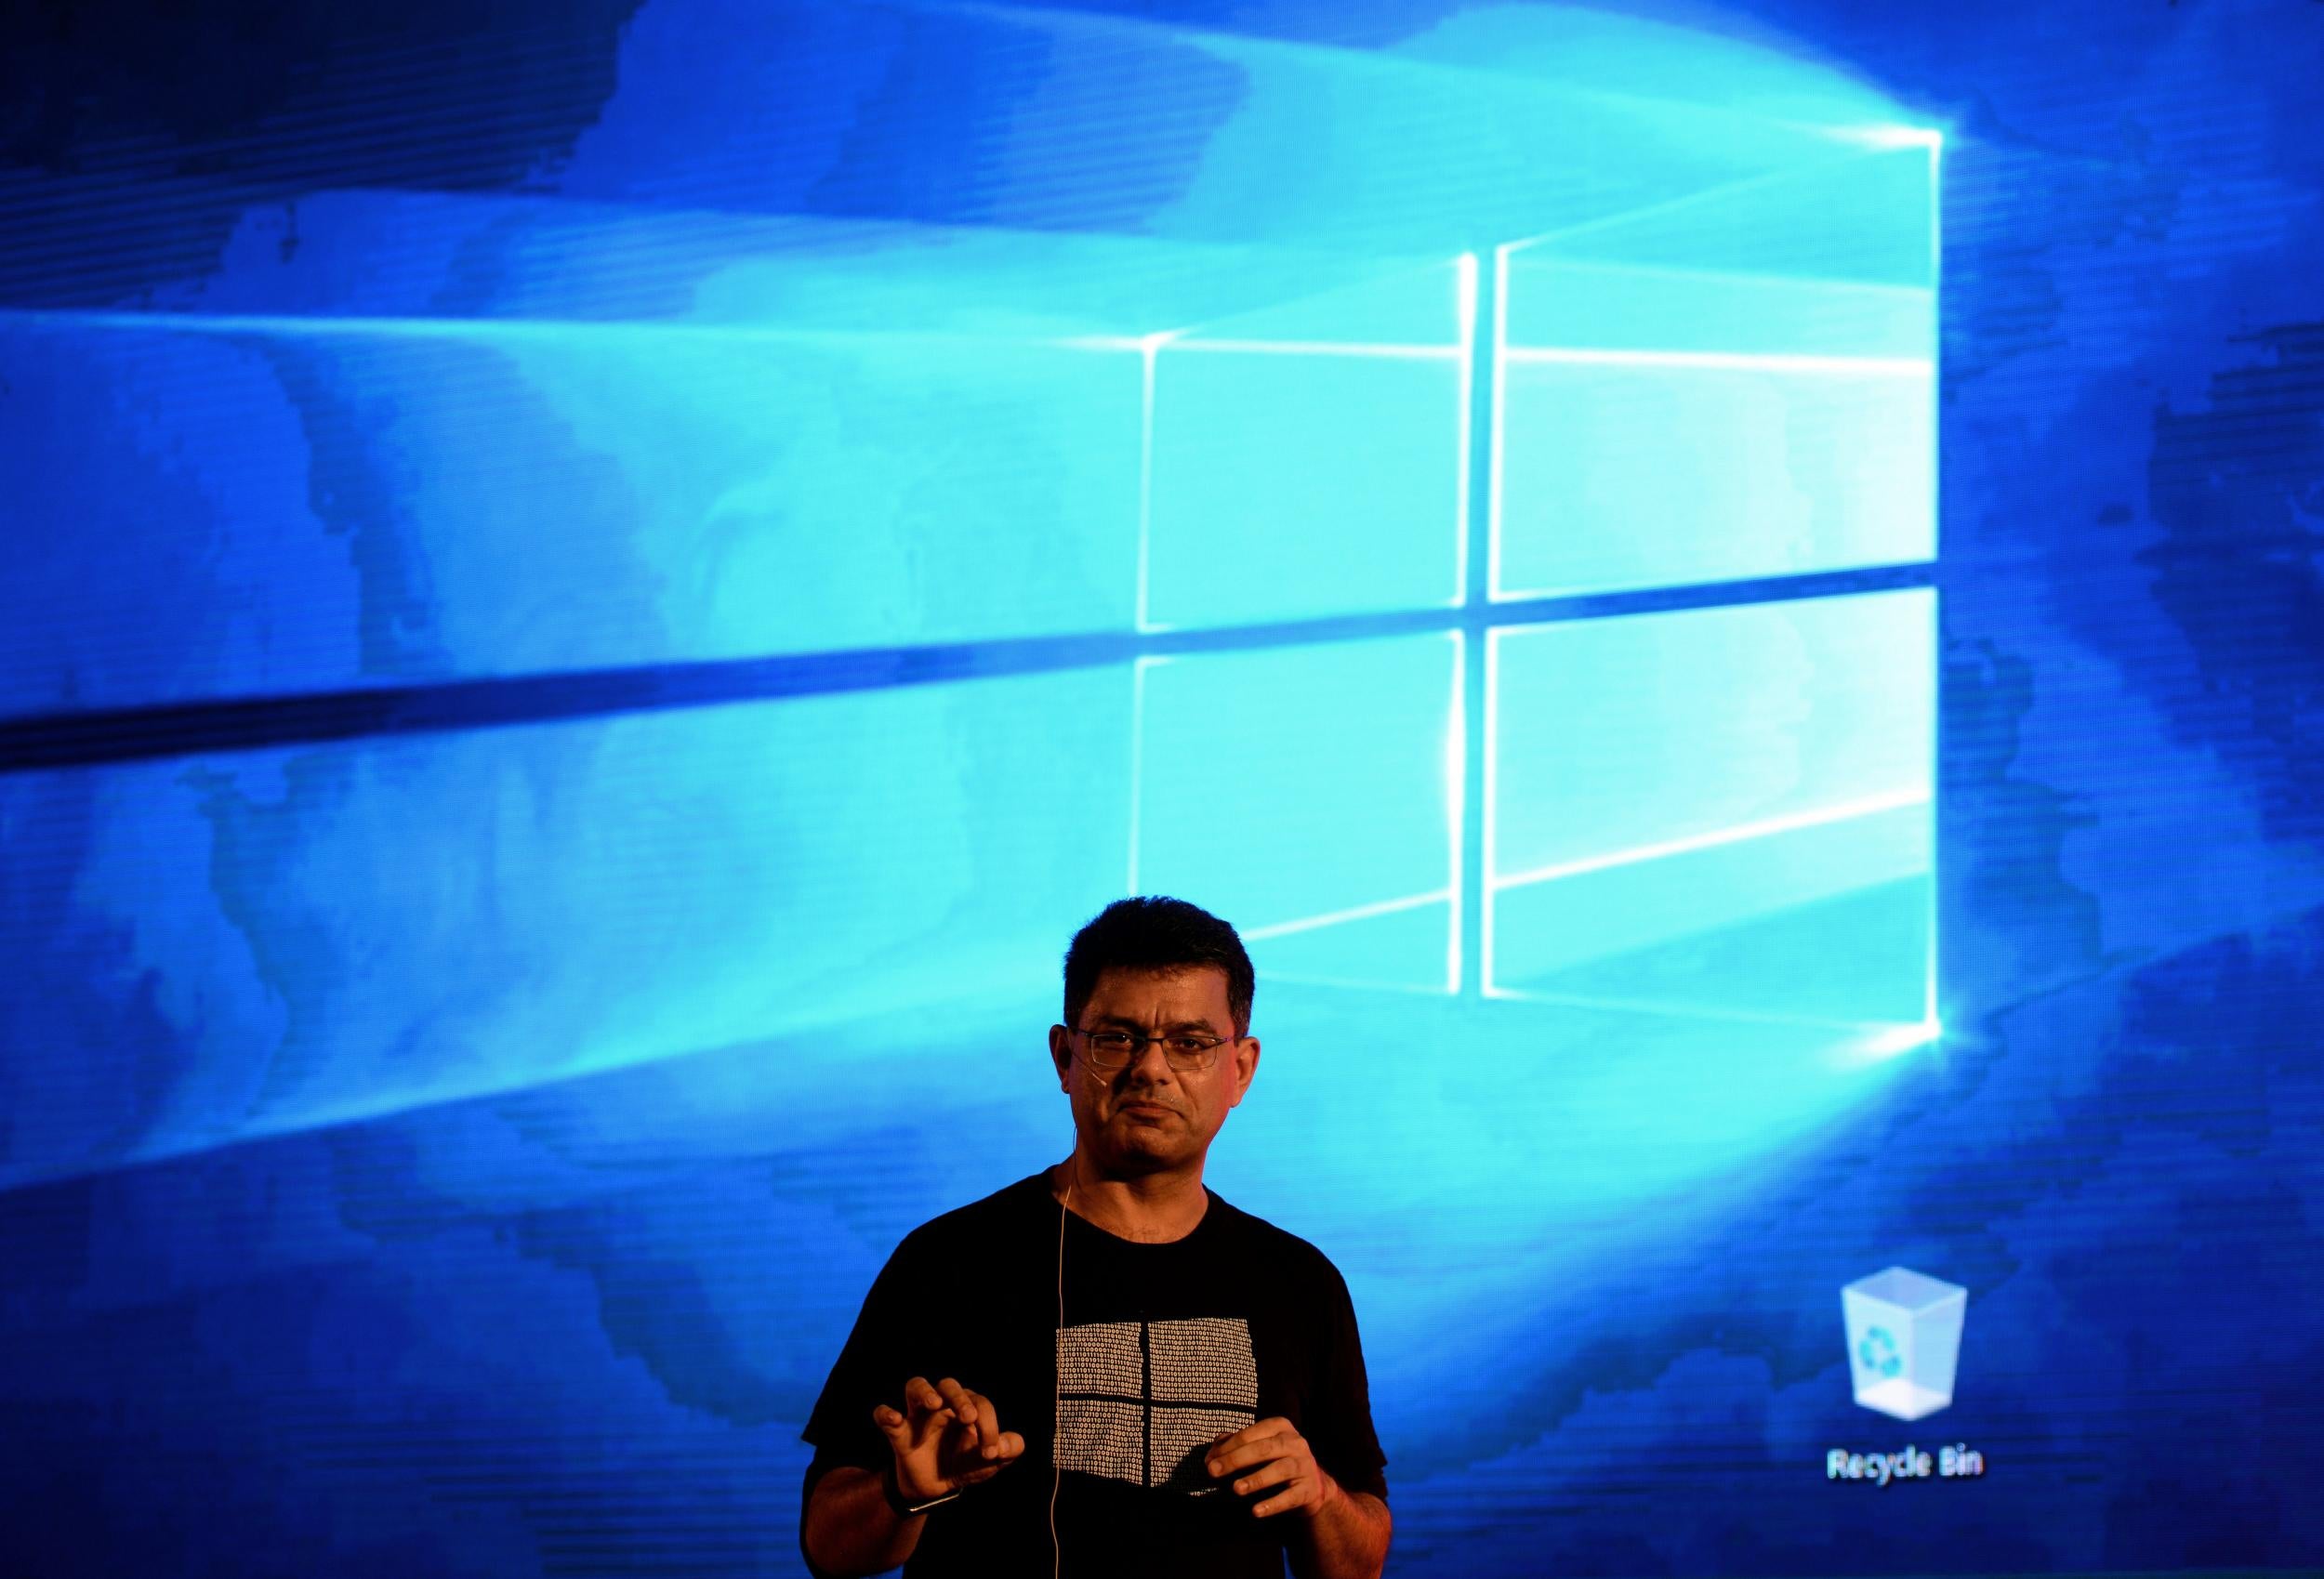 Microsoft's Vineet Durani speaks during the launch of Microsoft Windows 10 in New Delhi on July 29, 2015